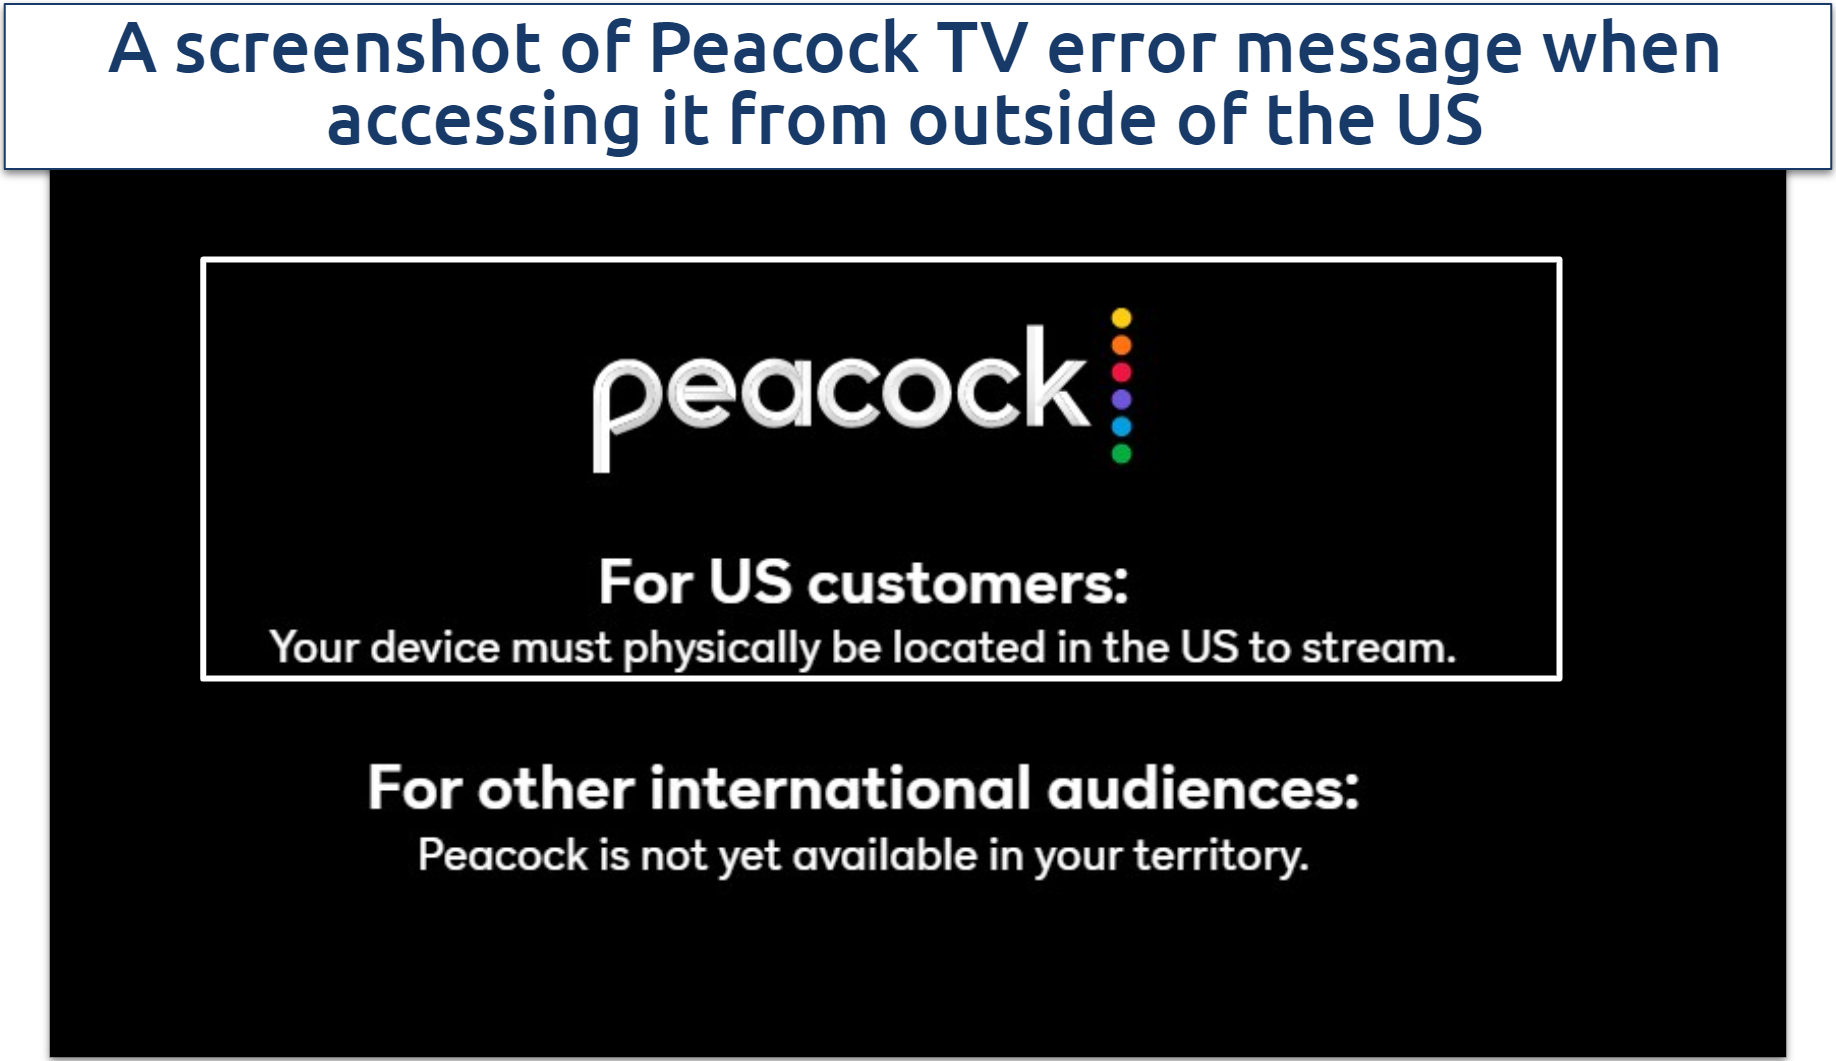 If you try to access Peacock content from outside the US, you’ll be blocked